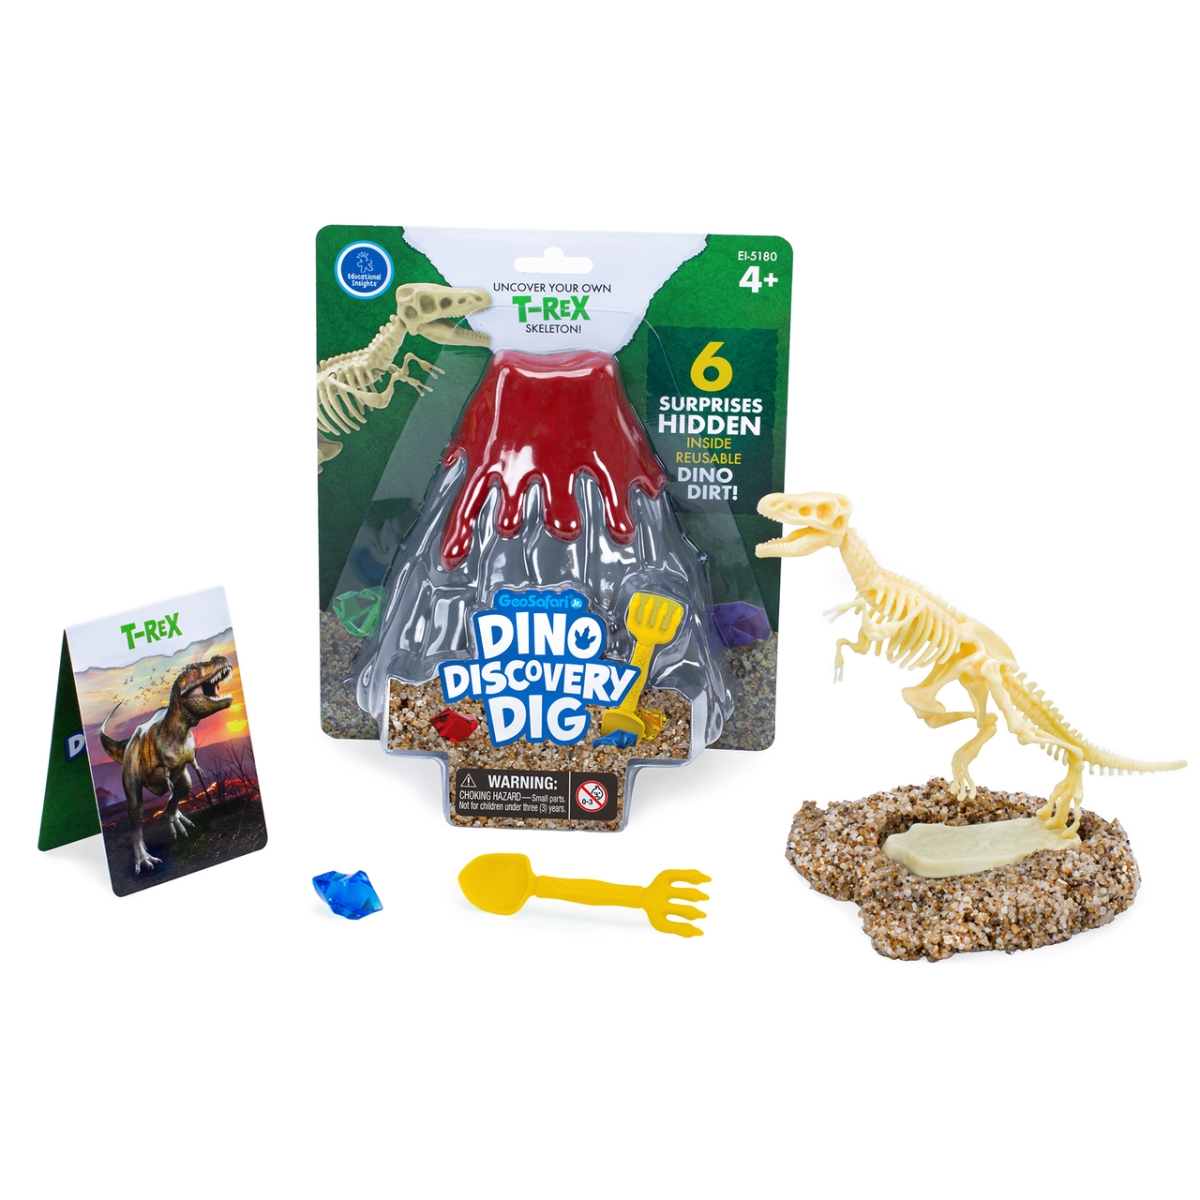 Picture of Learning Resources EI-5180 GeoSafari Jr Dino Discovery Dig T-Rex